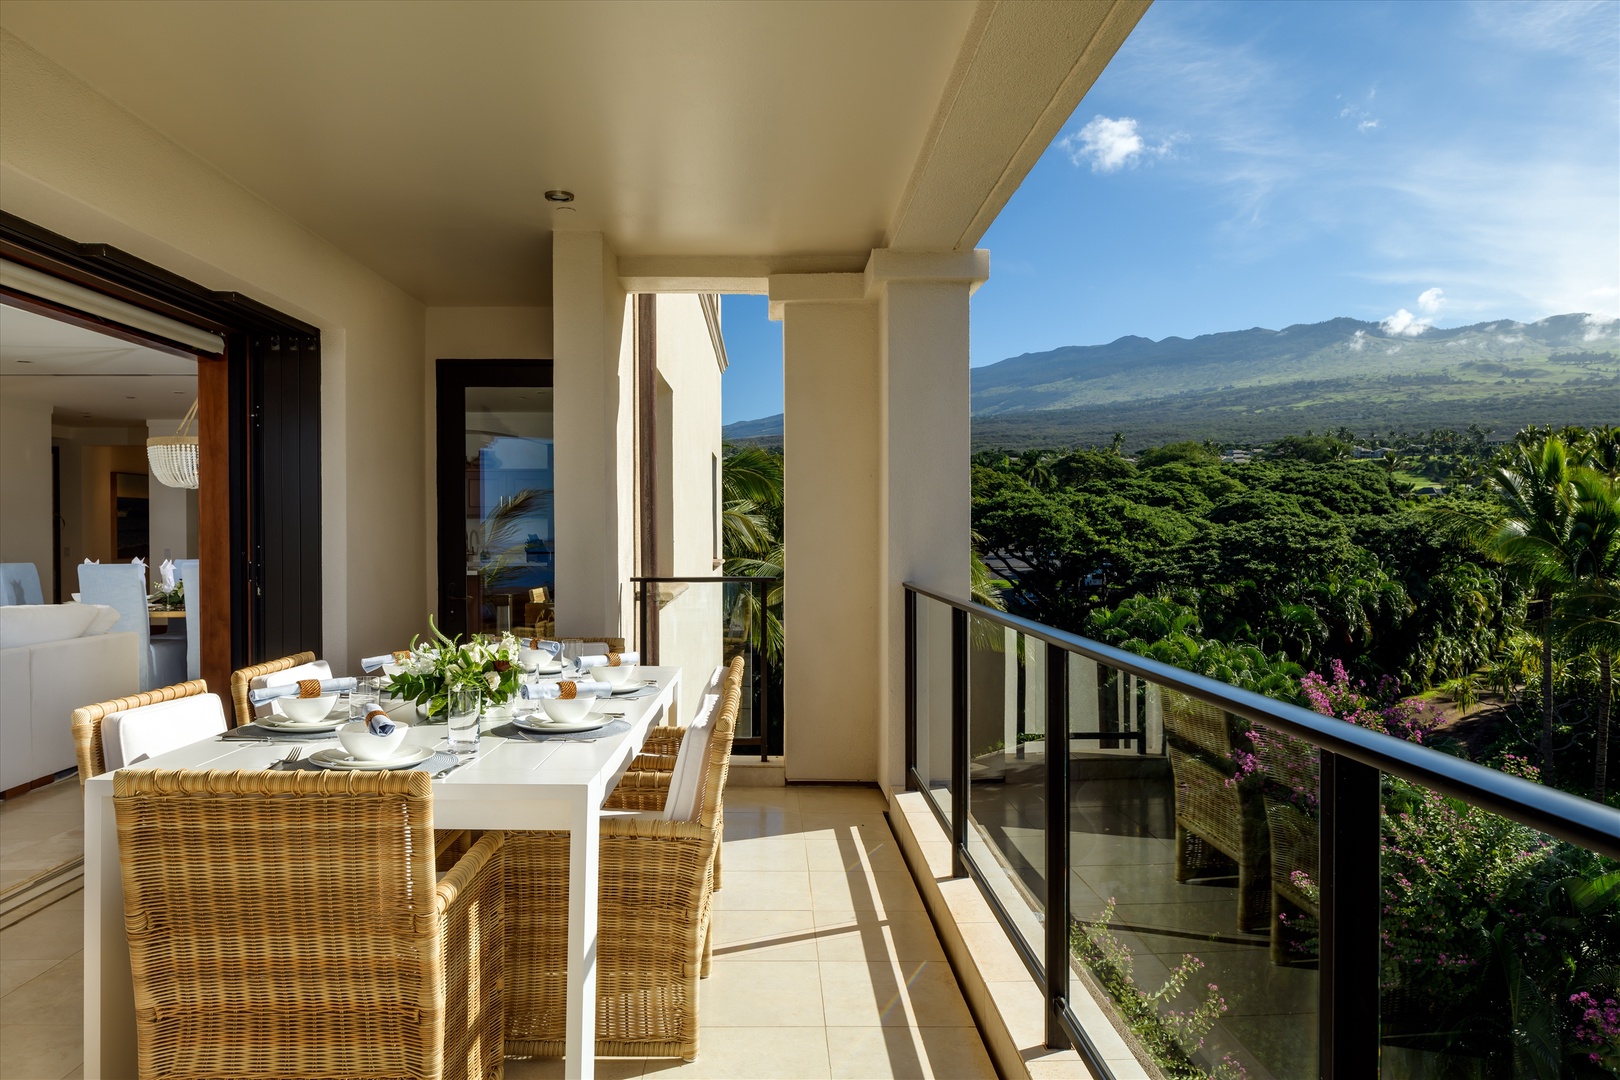 Wailea Vacation Rentals, Blue Ocean Suite H401 at Wailea Beach Villas* - Amazing Panoramic Ocean Haleakala and Neighboring Island Views from Blue Ocean Suite H401 Covered Lanai and Outdoor Dining Area